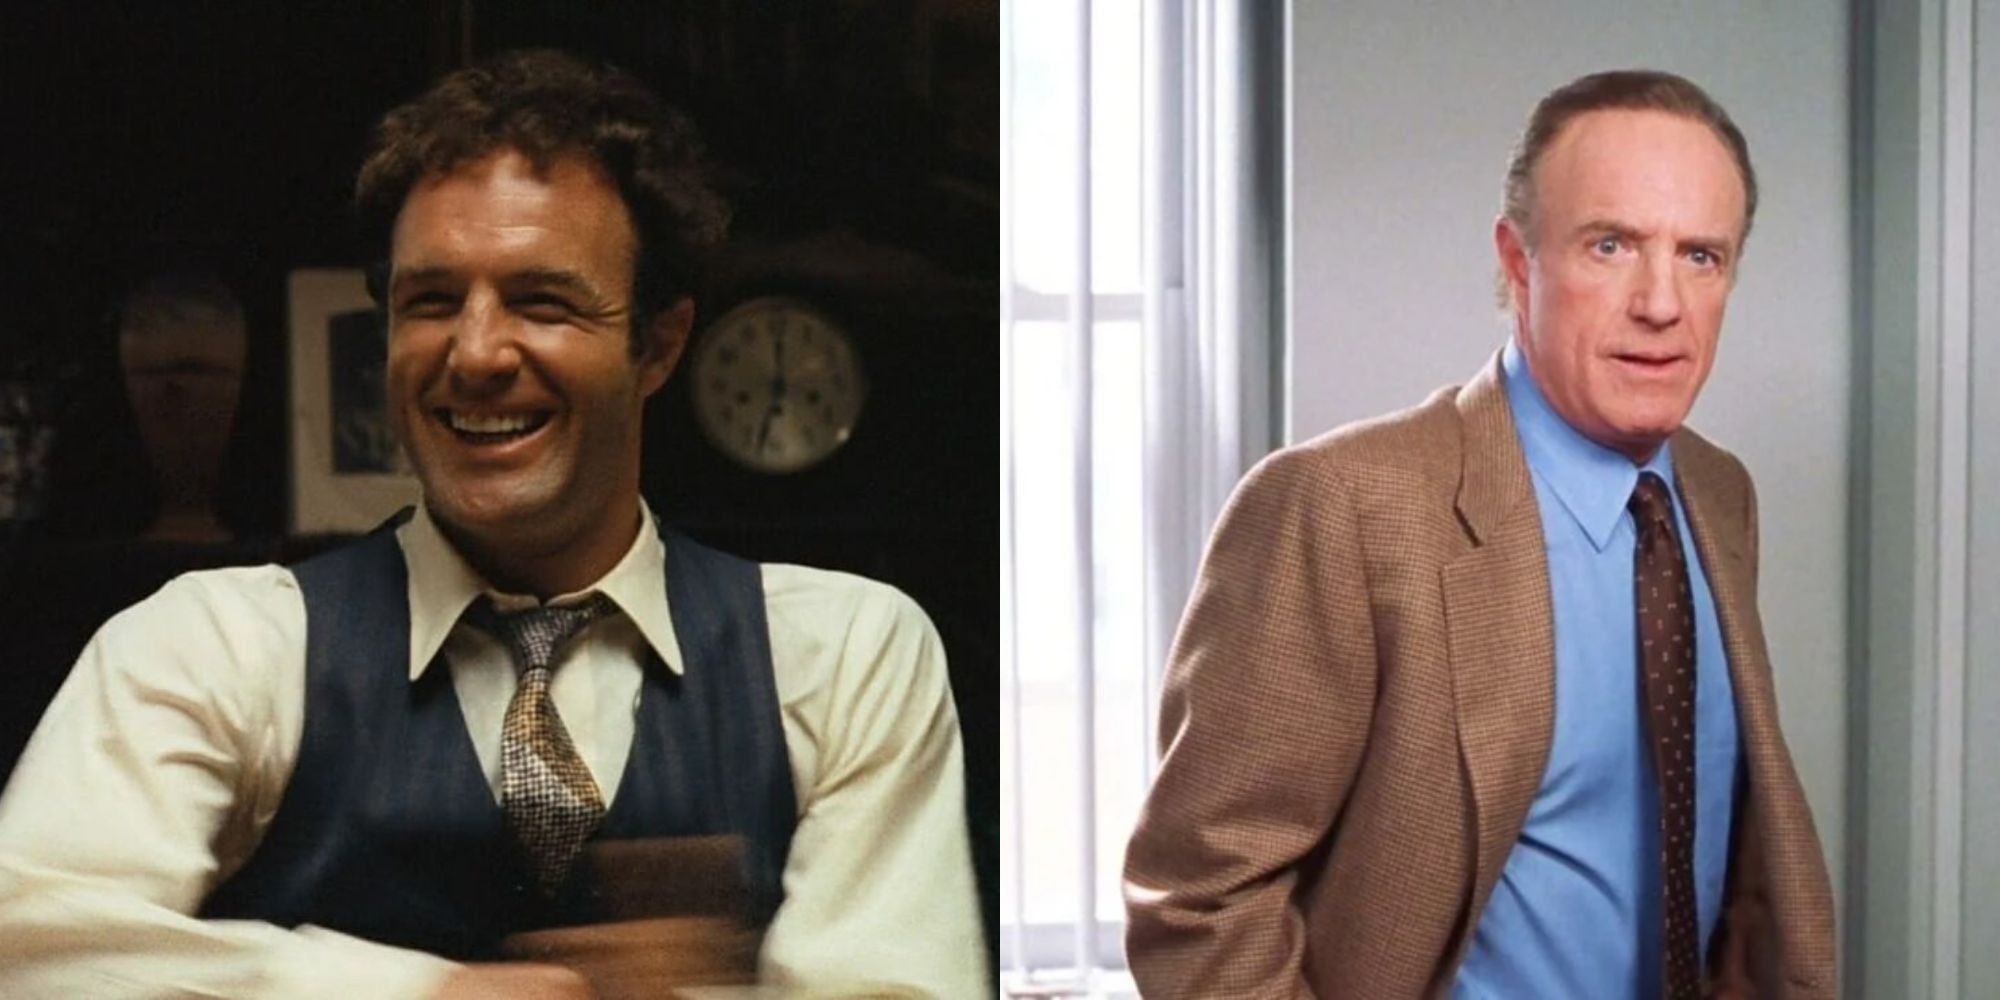 Split image showing James Caan in The Godfather and Elf.